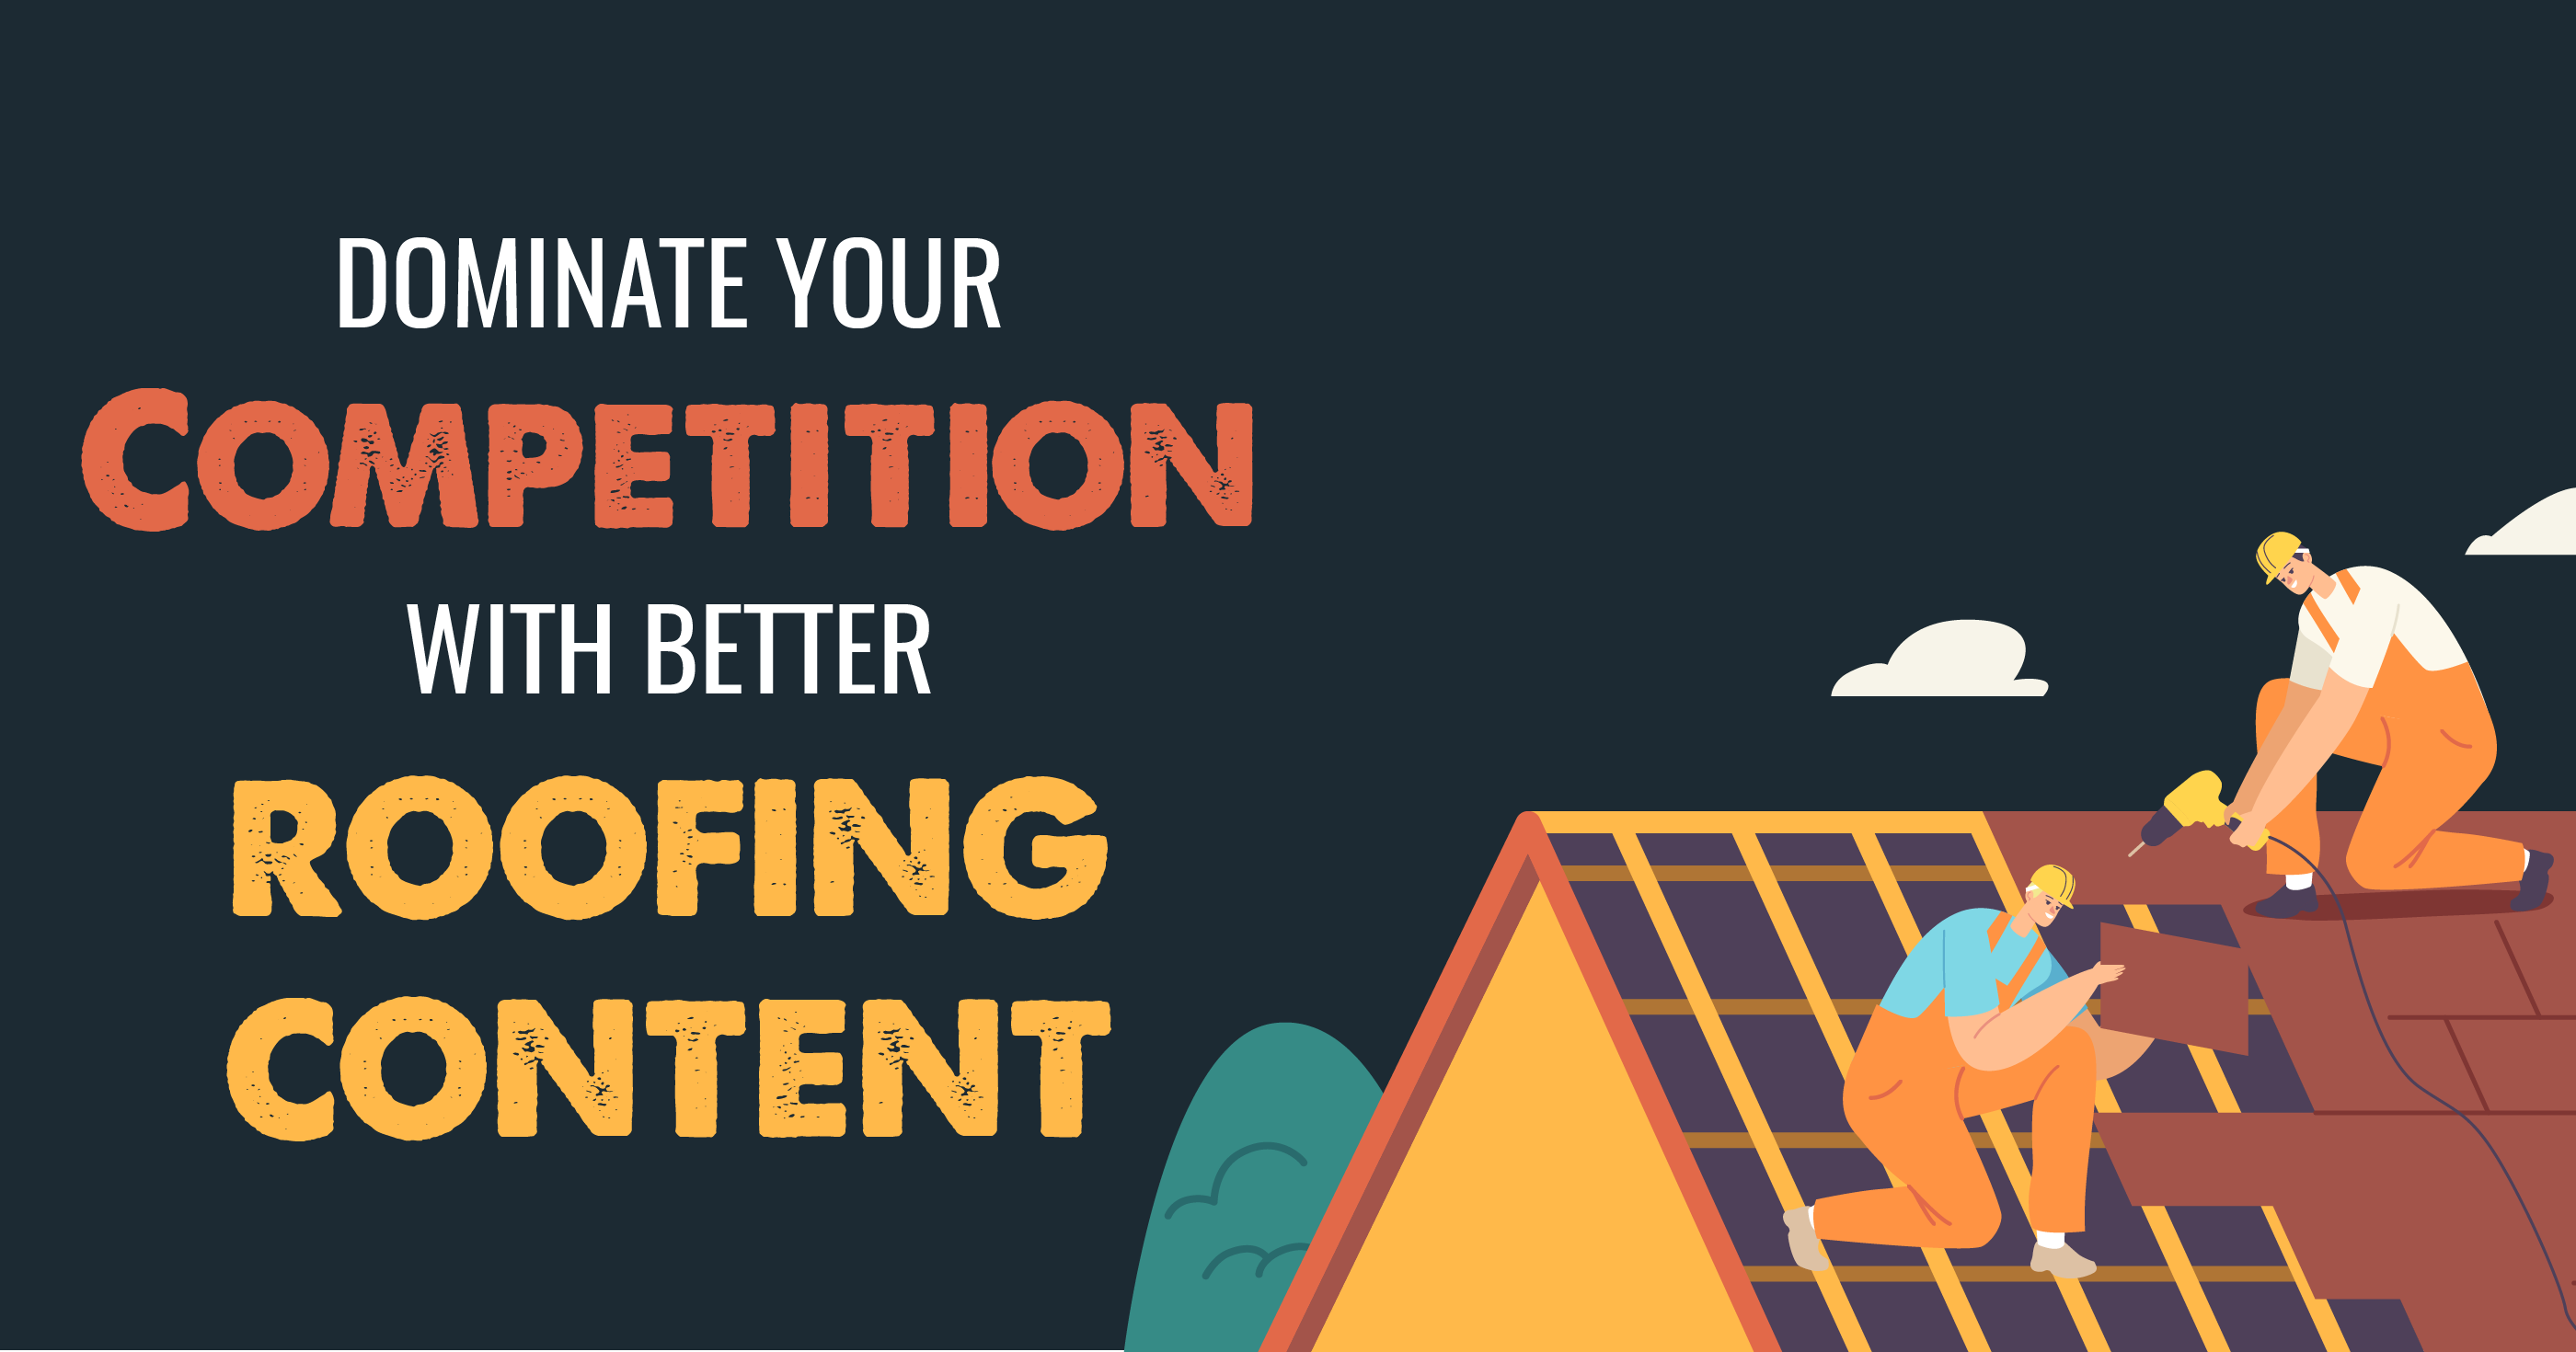 Dominate Your Competition with better roofing content